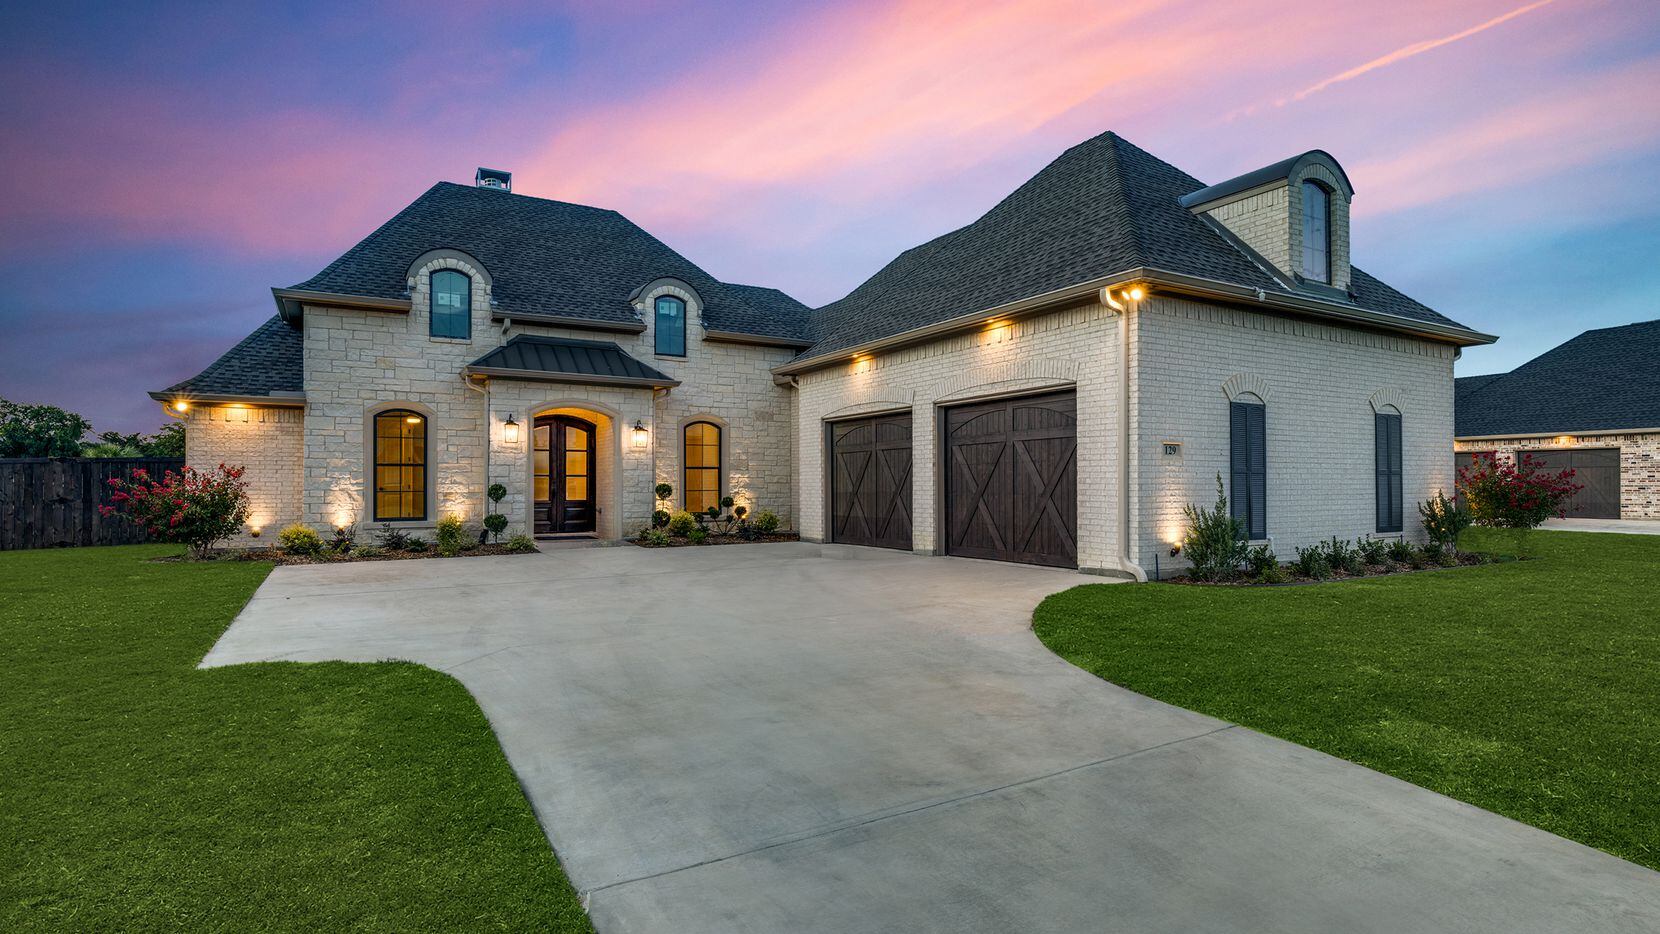 This custom residence is situated on a waterfront lot at 129 Old Bridge Road in Waxahachie’s...